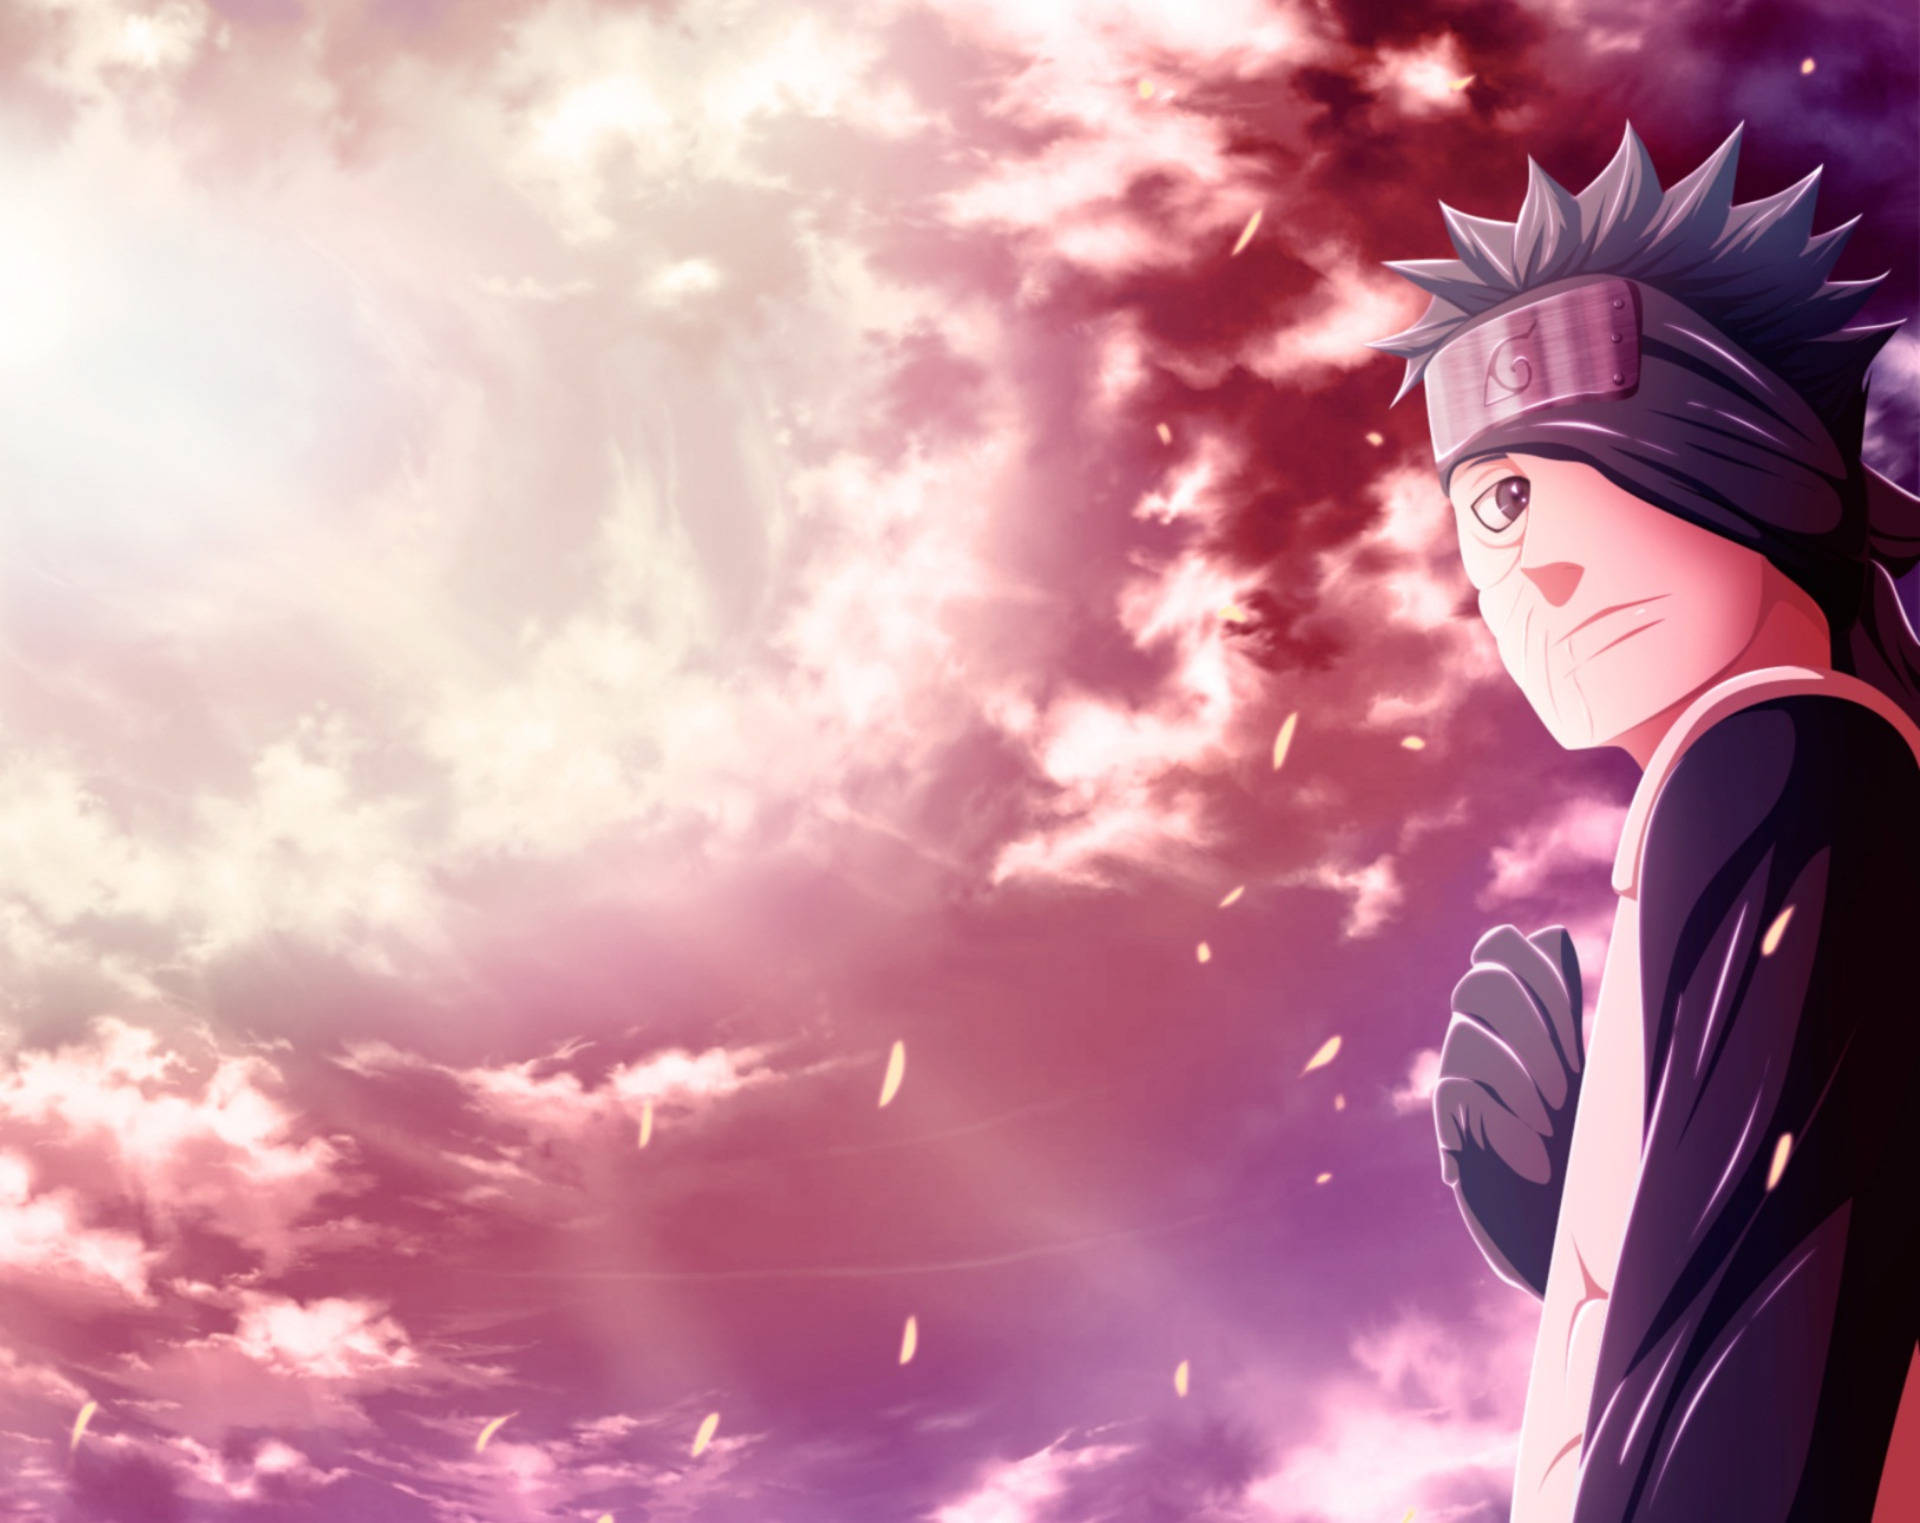 200+] Obito Wallpapers